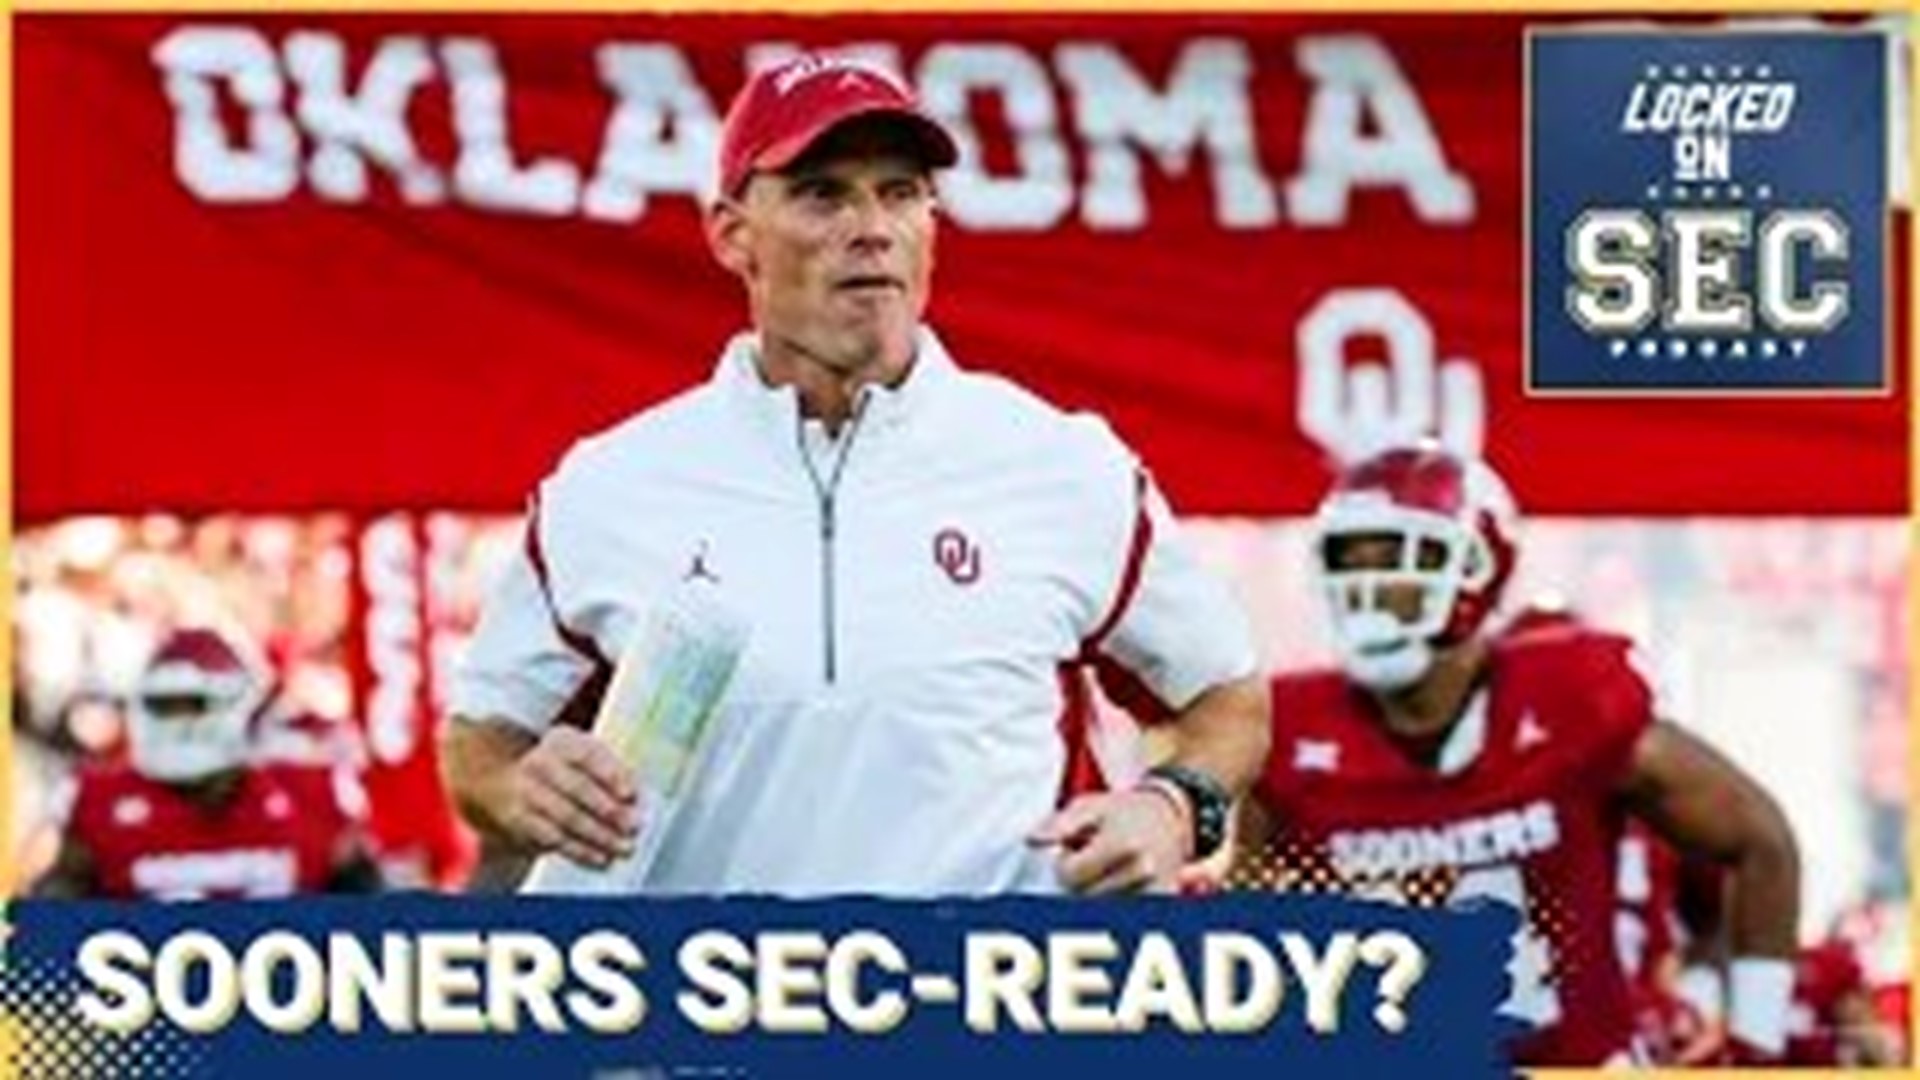 On today's show, we continue our SEC Spring Preview series stopping off in Norman for one of our soon-to-be newest teams in the conference - the Oklahoma Sooners.